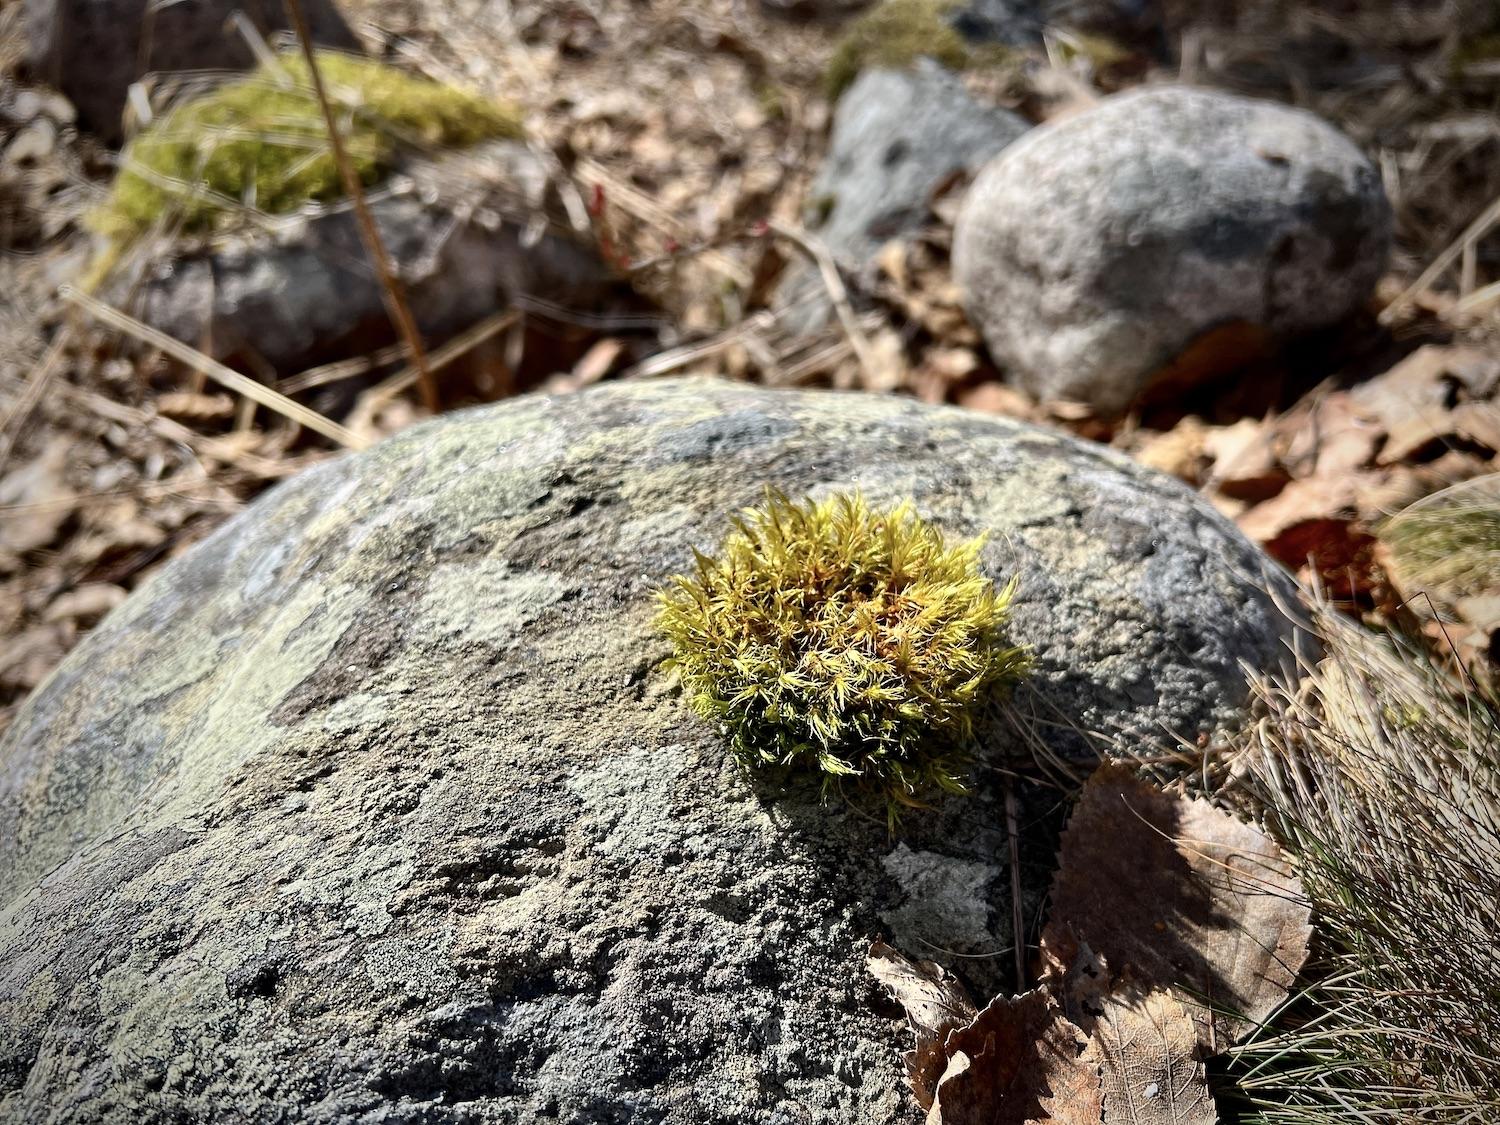 Signs of life in the forest along the Salmon River Walking Trail.